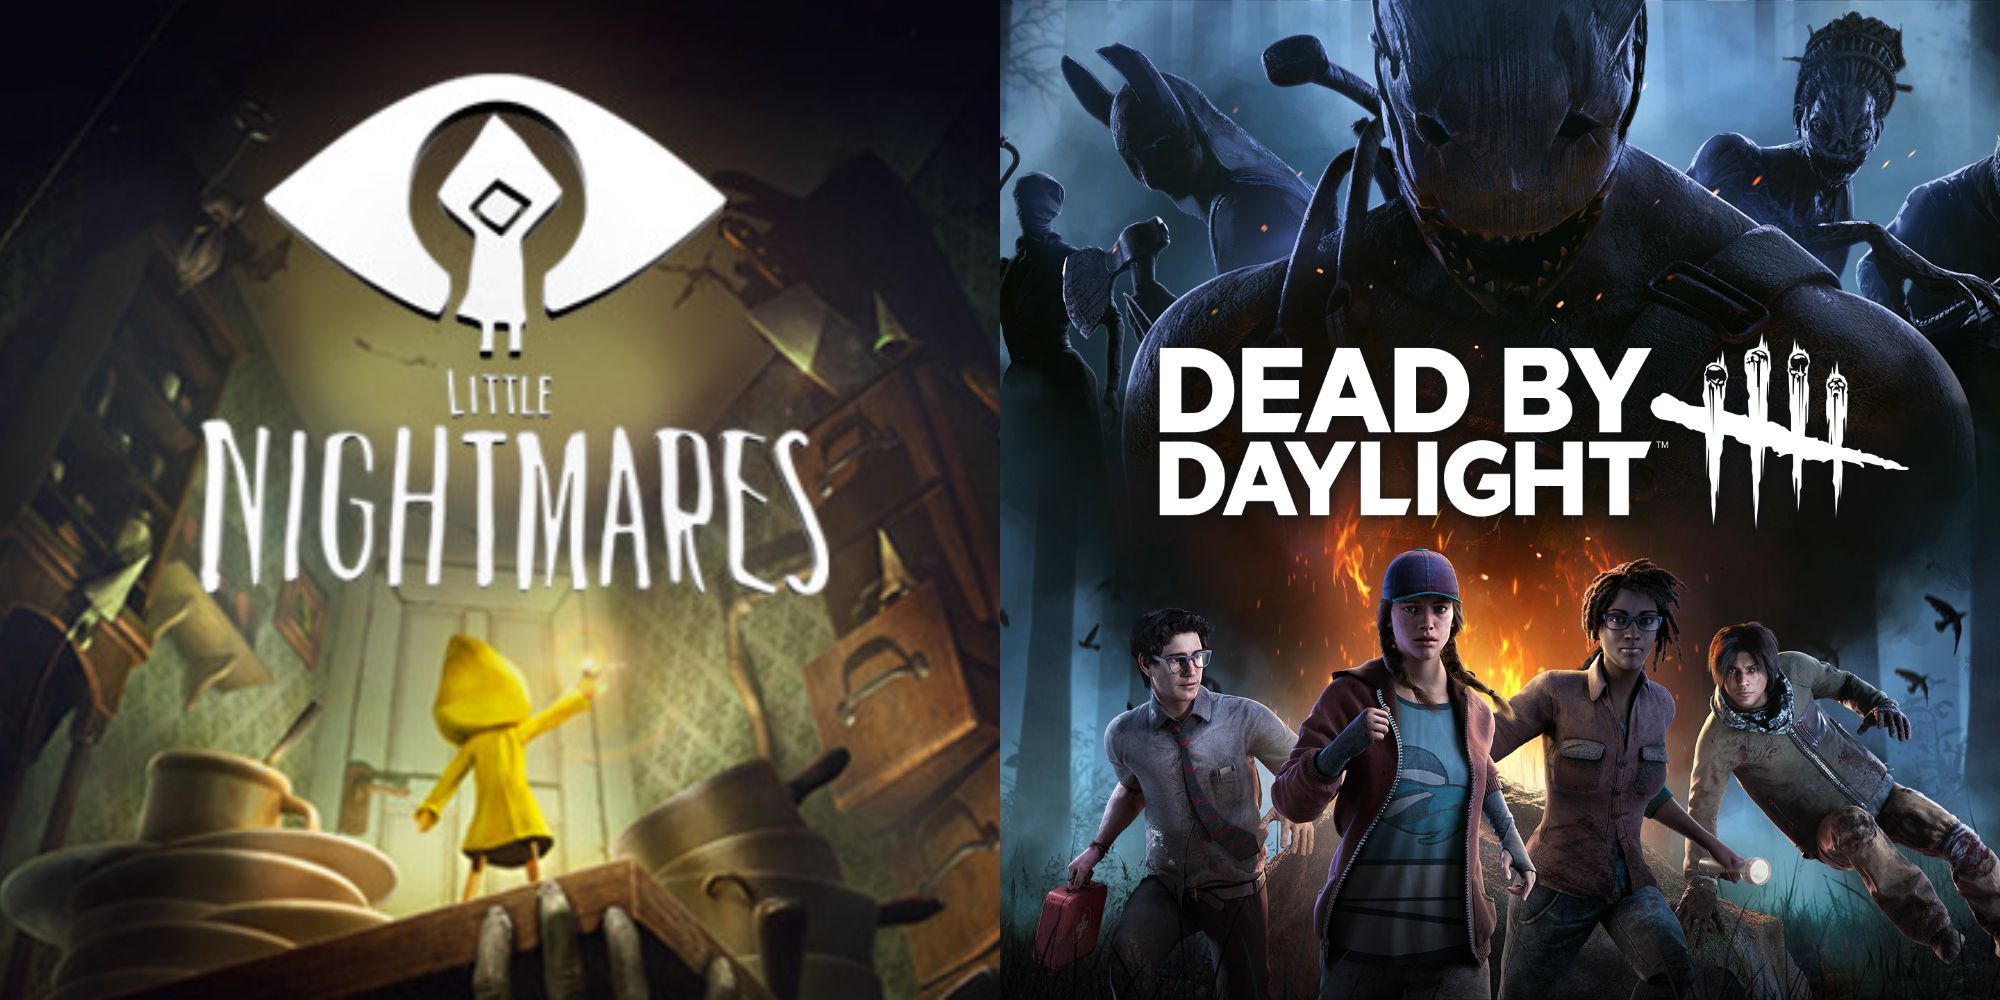 Split image showing covers for Little Nightmares and Dead by Deadlight.